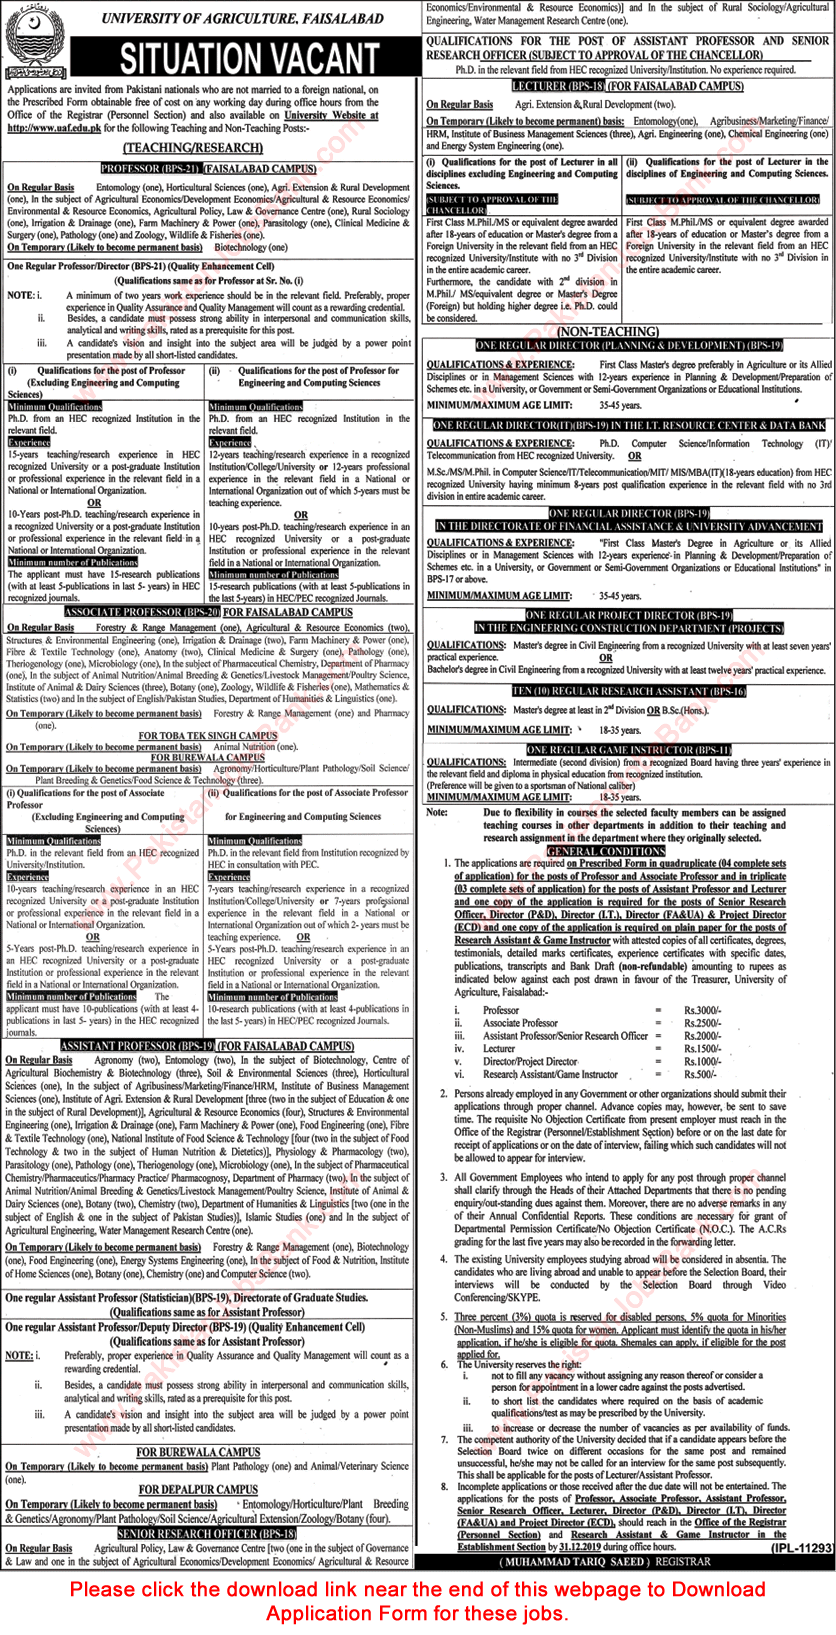 University of Agriculture Faisalabad Jobs December 2019 Application Form Teaching Faculty & Others Latest